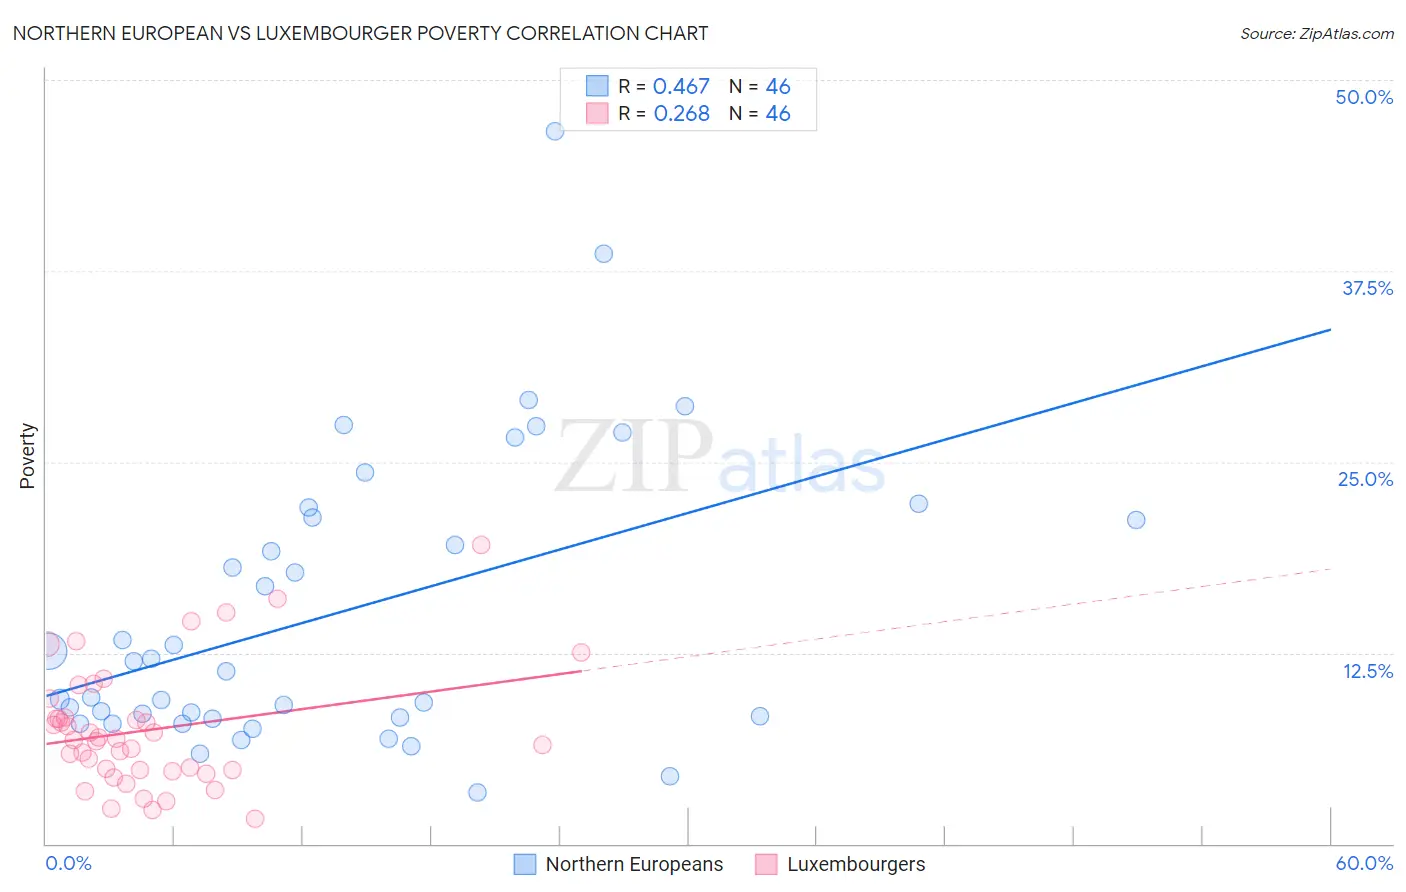 Northern European vs Luxembourger Poverty